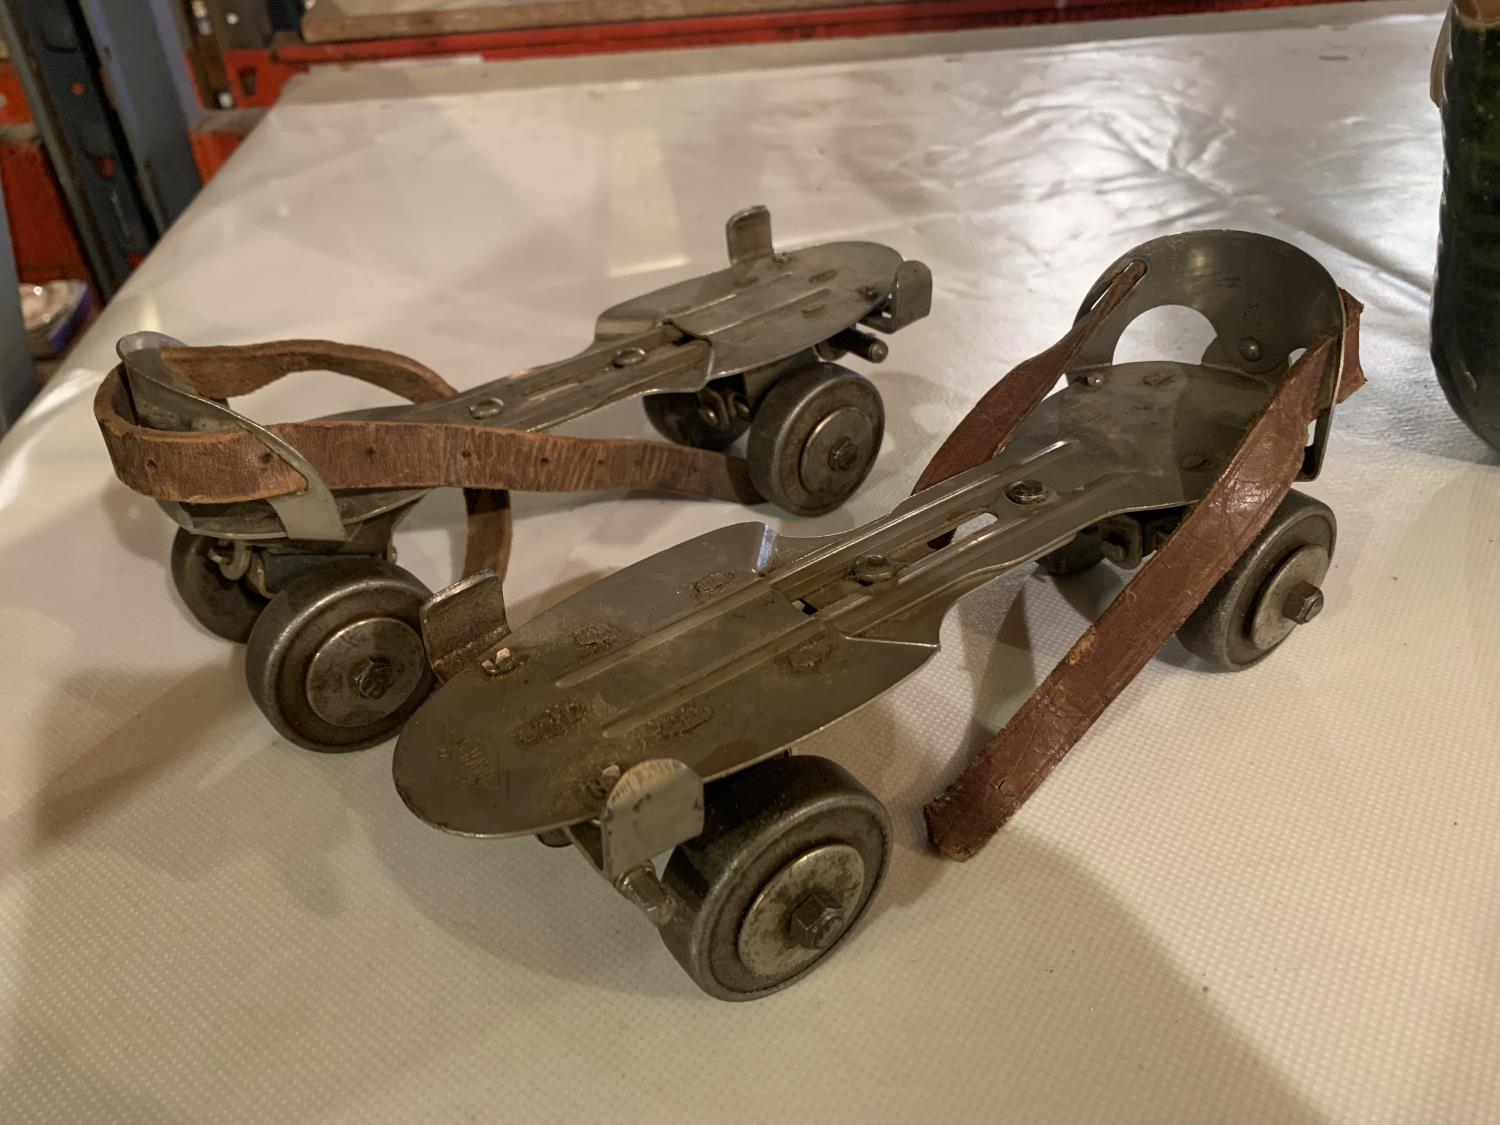 A PAIR OF DAVIES ADJUSTABLE ROLLER SKATES WITH LEATHER STRAPS